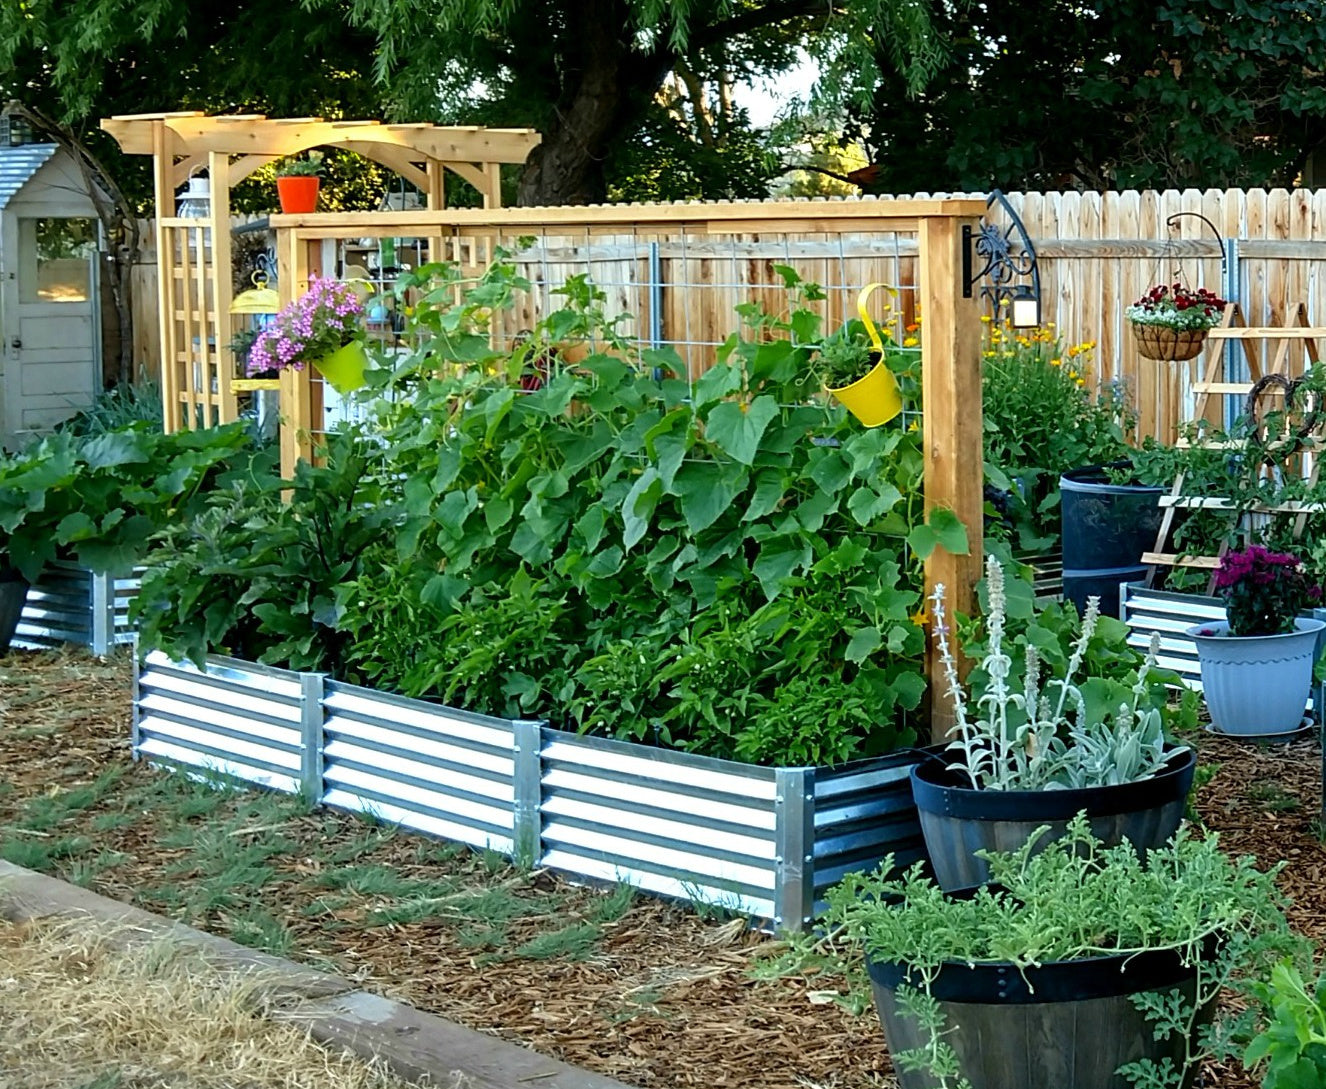 largo garden bed in backyard with cucumbers, peppers and squash